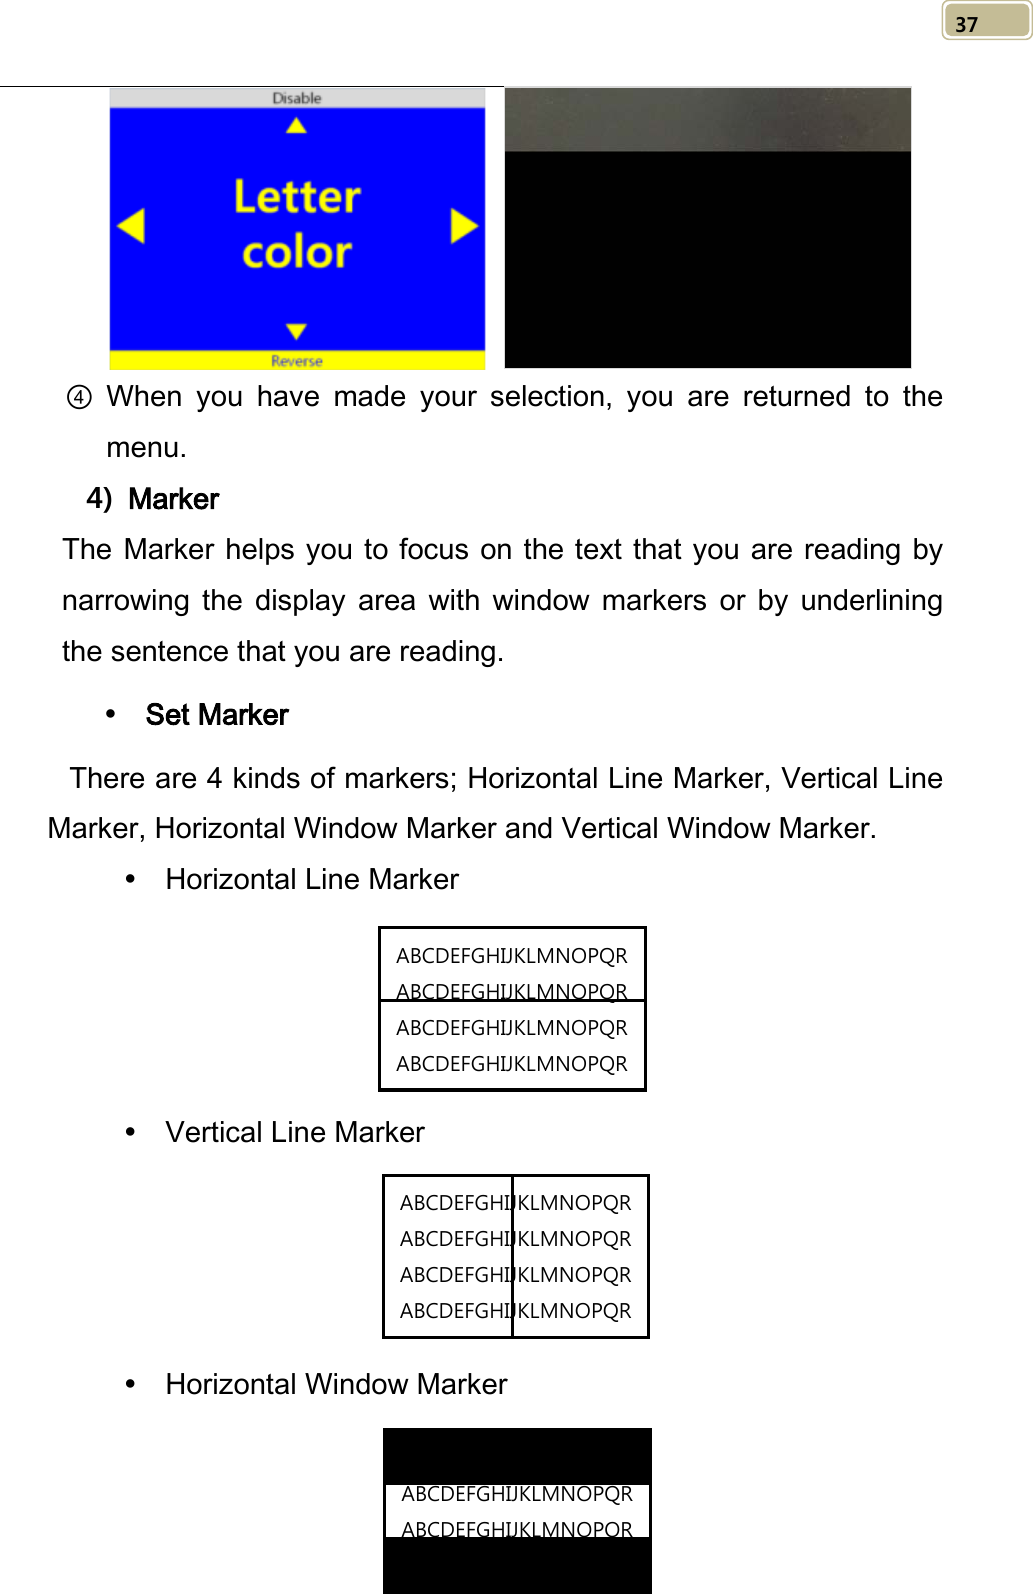   37     ④ When you have made your selection, you are returned to the menu.     4) Marker The Marker helps you to focus on the text that you are reading by narrowing the display area with window markers or by underlining the sentence that you are reading.    Set Marker There are 4 kinds of markers; Horizontal Line Marker, Vertical Line Marker, Horizontal Window Marker and Vertical Window Marker.  Horizontal Line Marker      Vertical Line Marker      Horizontal Window Marker   ABCDEFGHIJKLMNOPQR ABCDEFGHIJKLMNOPQR ABCDEFGHIJKLMNOPQR ABCDEFGHIJKLMNOPQR  ABCDEFGHIJKLMNOPQR ABCDEFGHIJKLMNOPQR ABCDEFGHIJKLMNOPQR ABCDEFGHIJKLMNOPQR  ABCDEFGHIJKLMNOPQR ABCDEFGHIJKLMNOPQR ABCDEFGHIJKLMNOPQR ABCDEFGHIJKLMNOPQR  